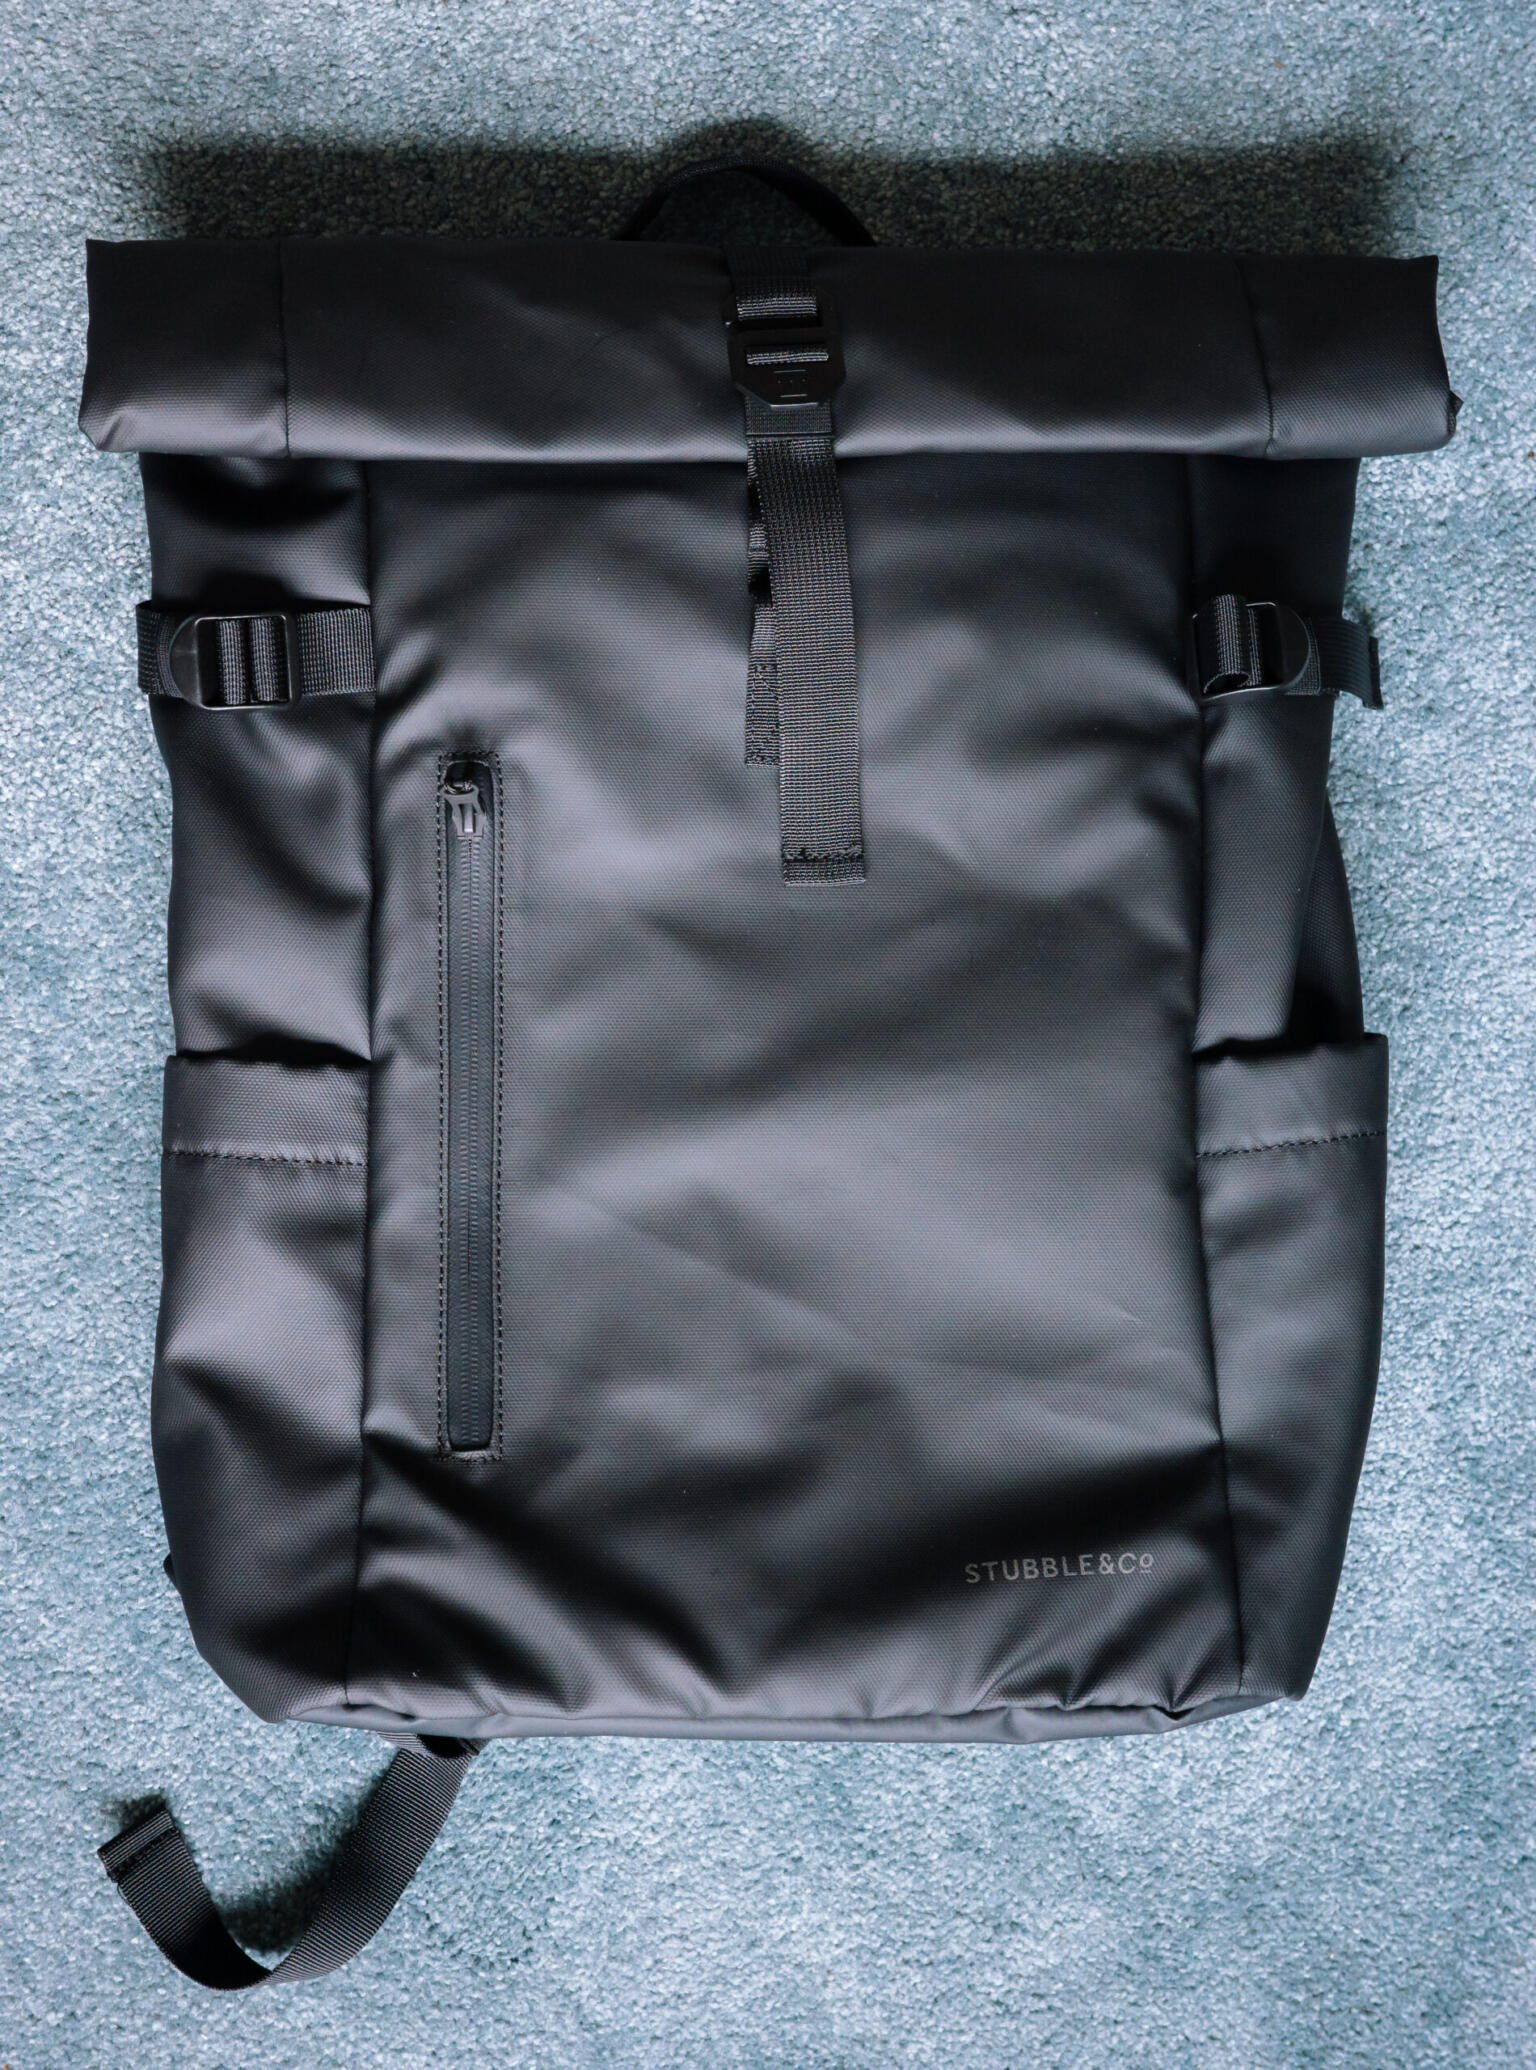 7. Stubble & Co Roll Top: Great for Travelers and Digital Nomads